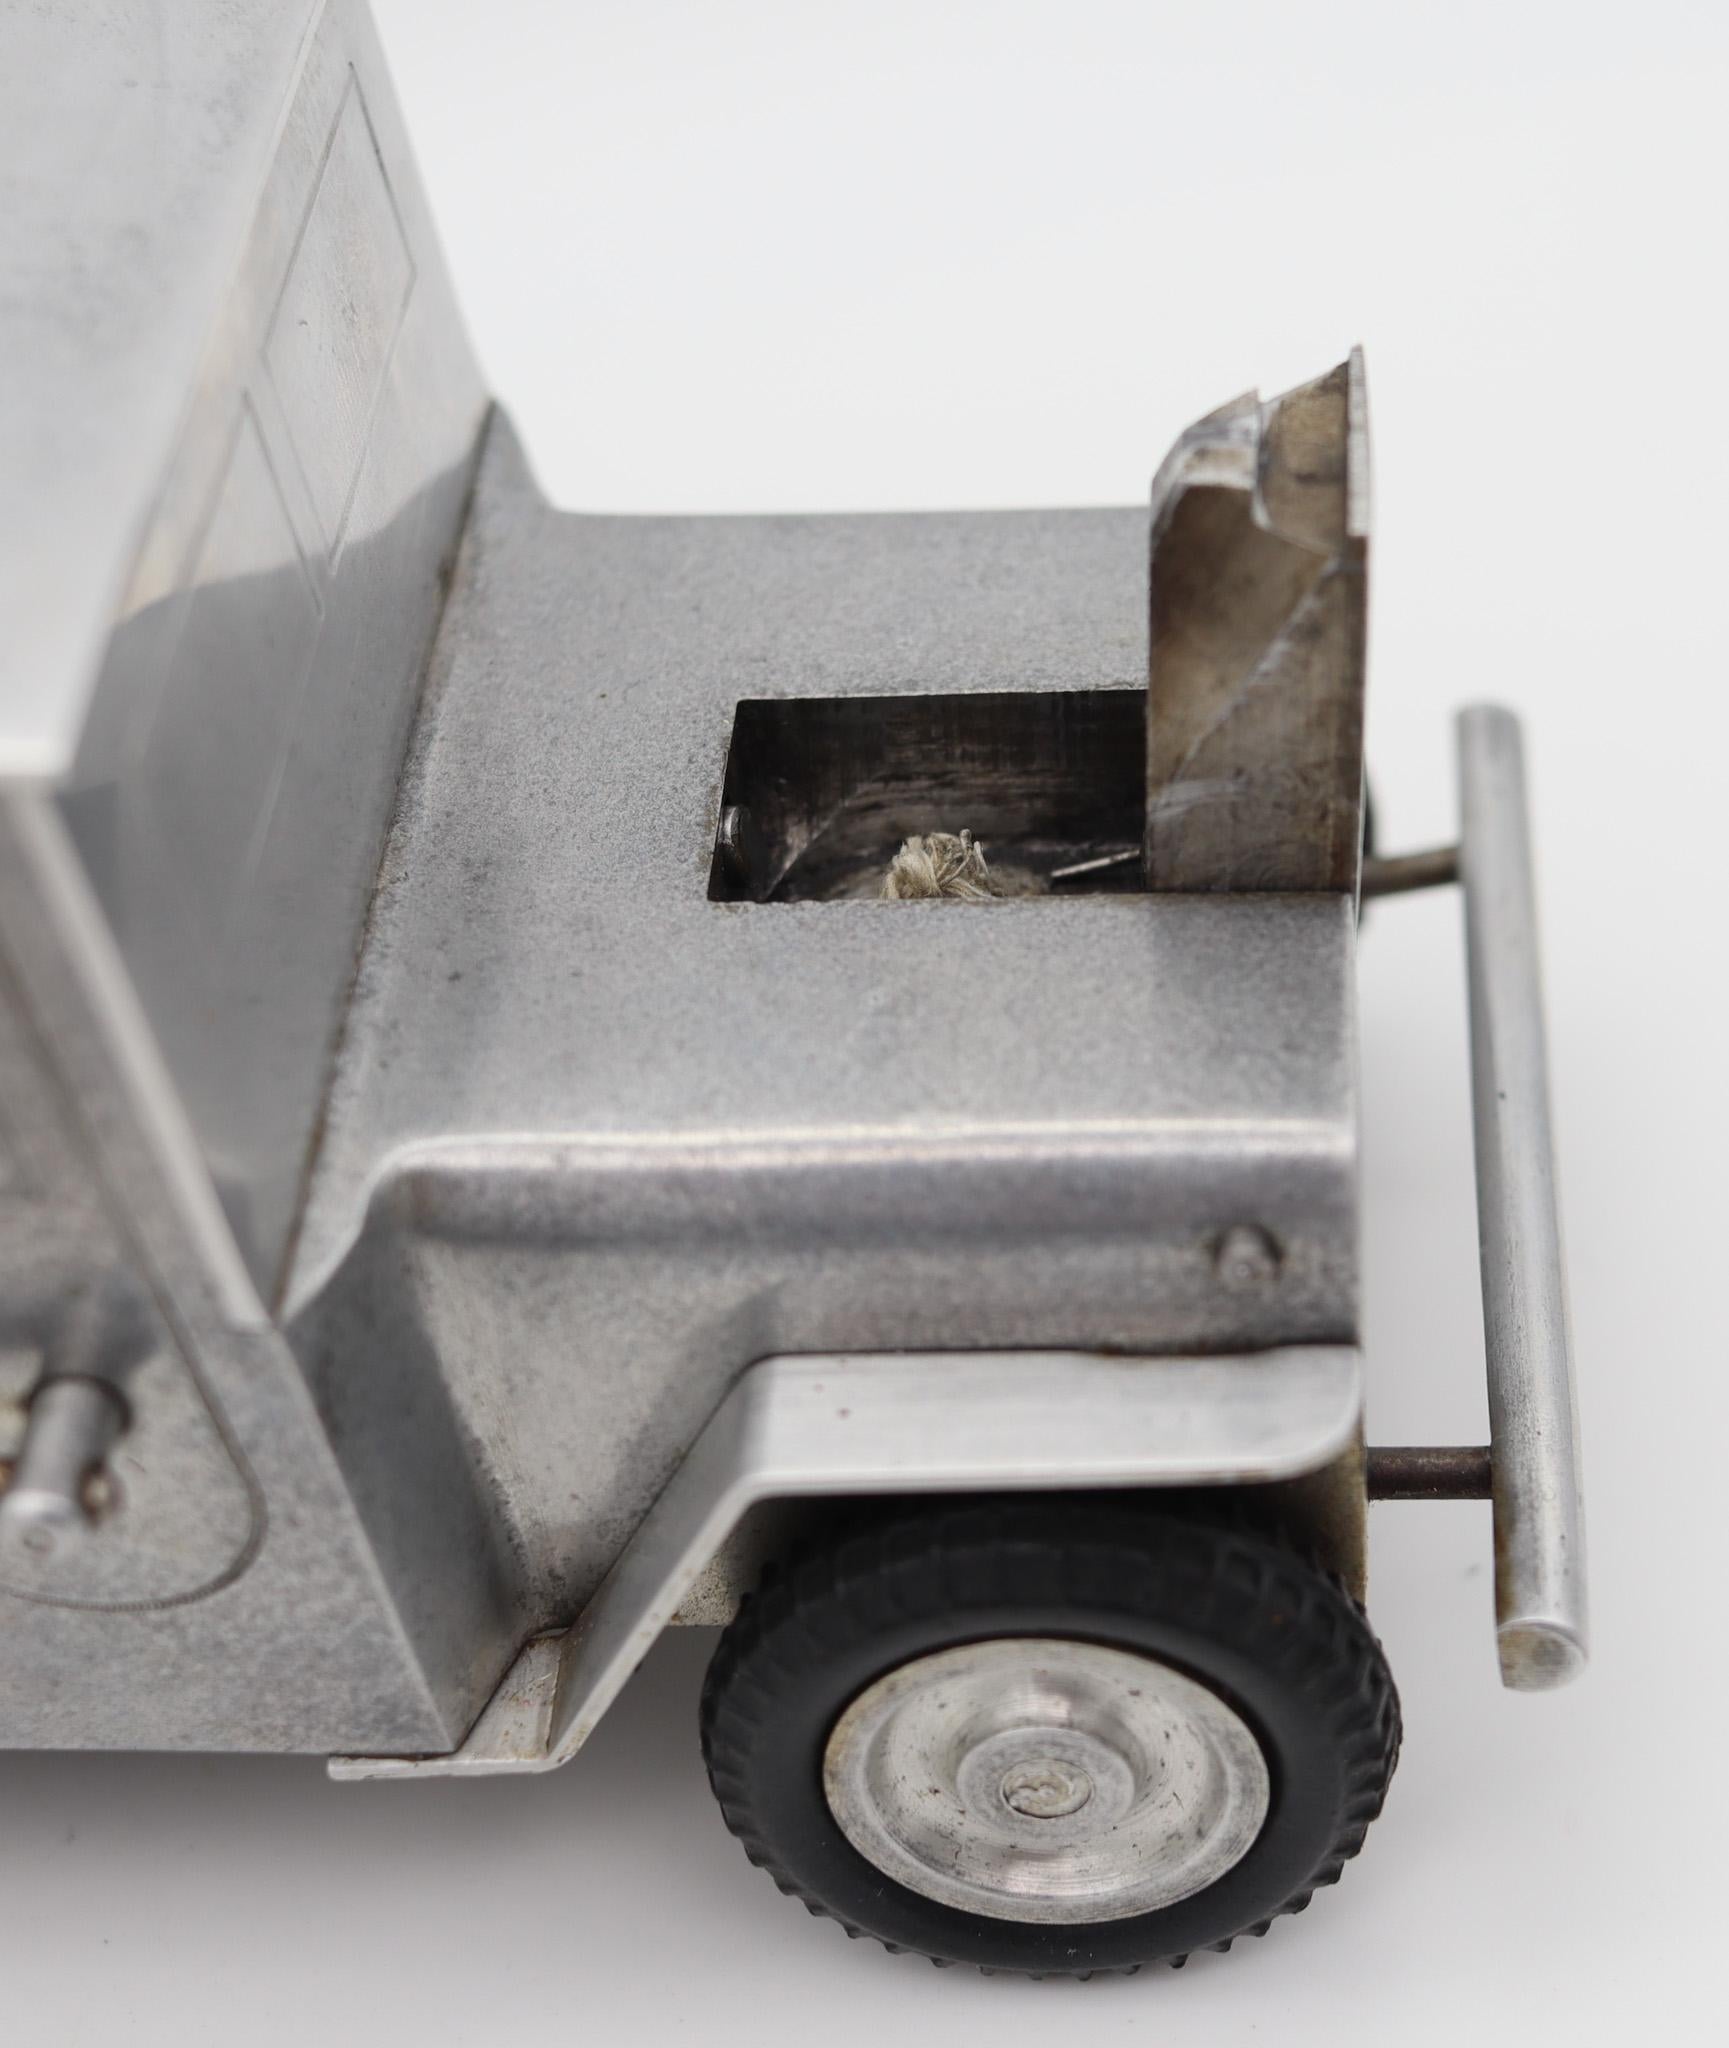 Mid-Century Modern Baier German 1947 Army Truck Lighter Cigarette Holder And Ashtray In Aluminum For Sale